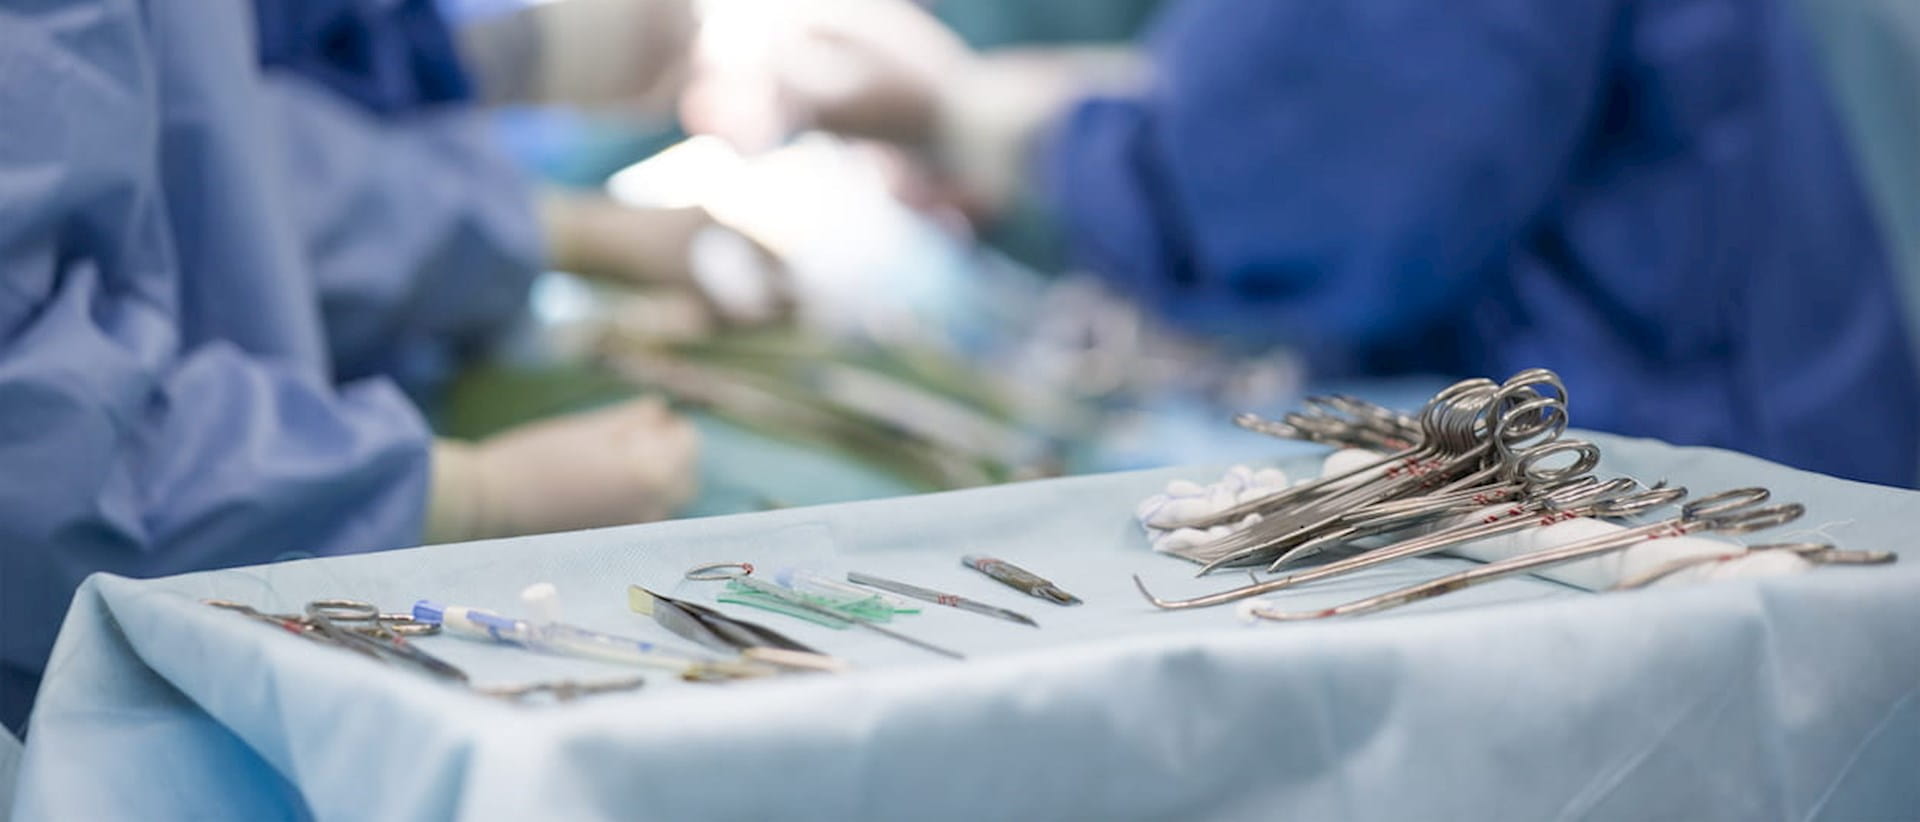 Surgical instruments in operating theatre